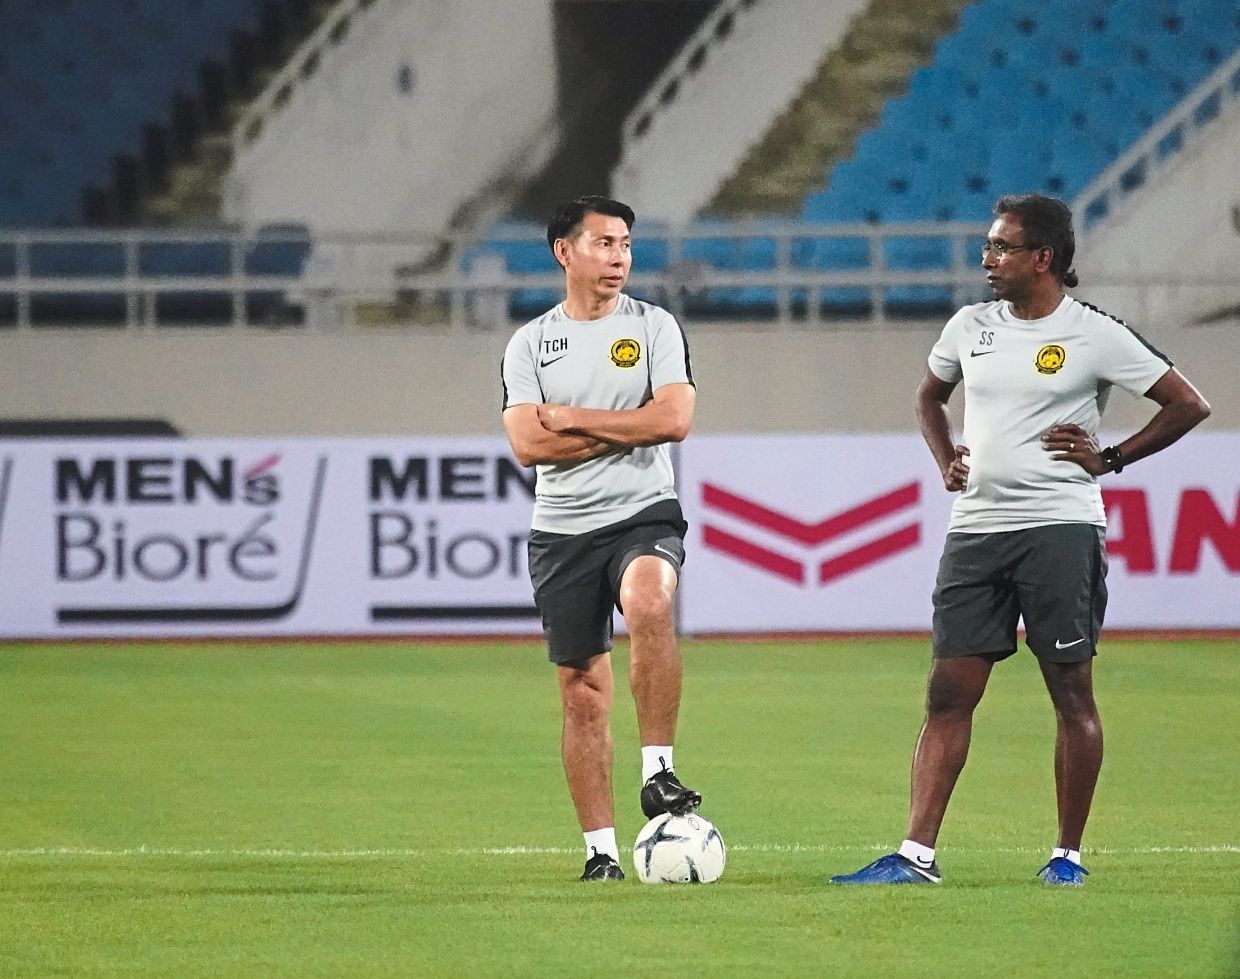 Cheng Hoe to hold training camp after lifeline from Sports Ministry